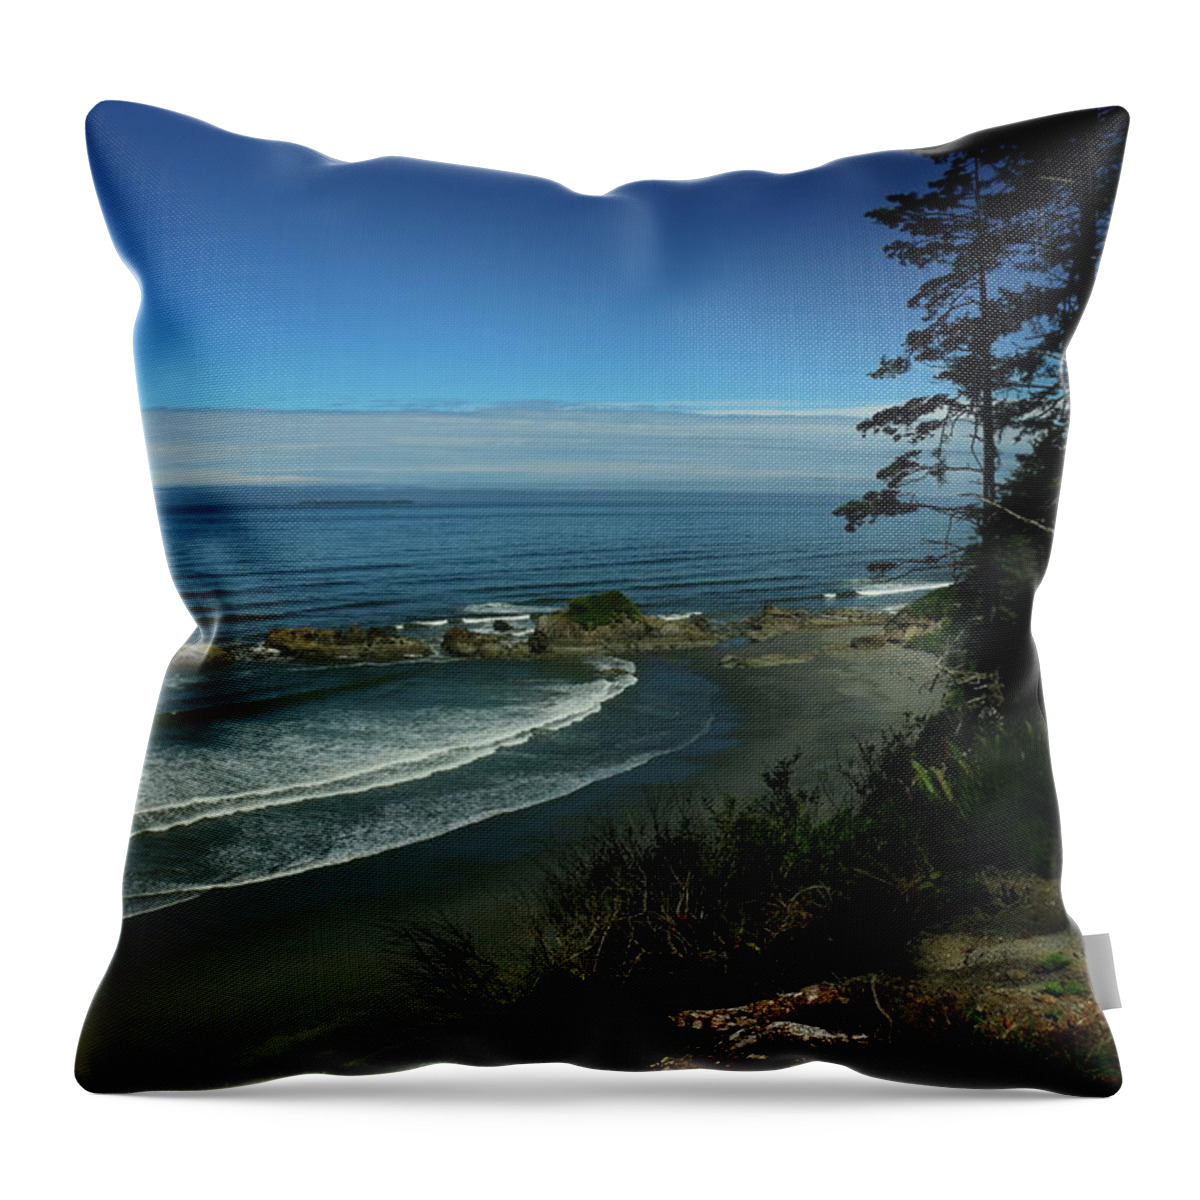  Beach Throw Pillow featuring the photograph Coastal Cliff by Christiane Schulze Art And Photography